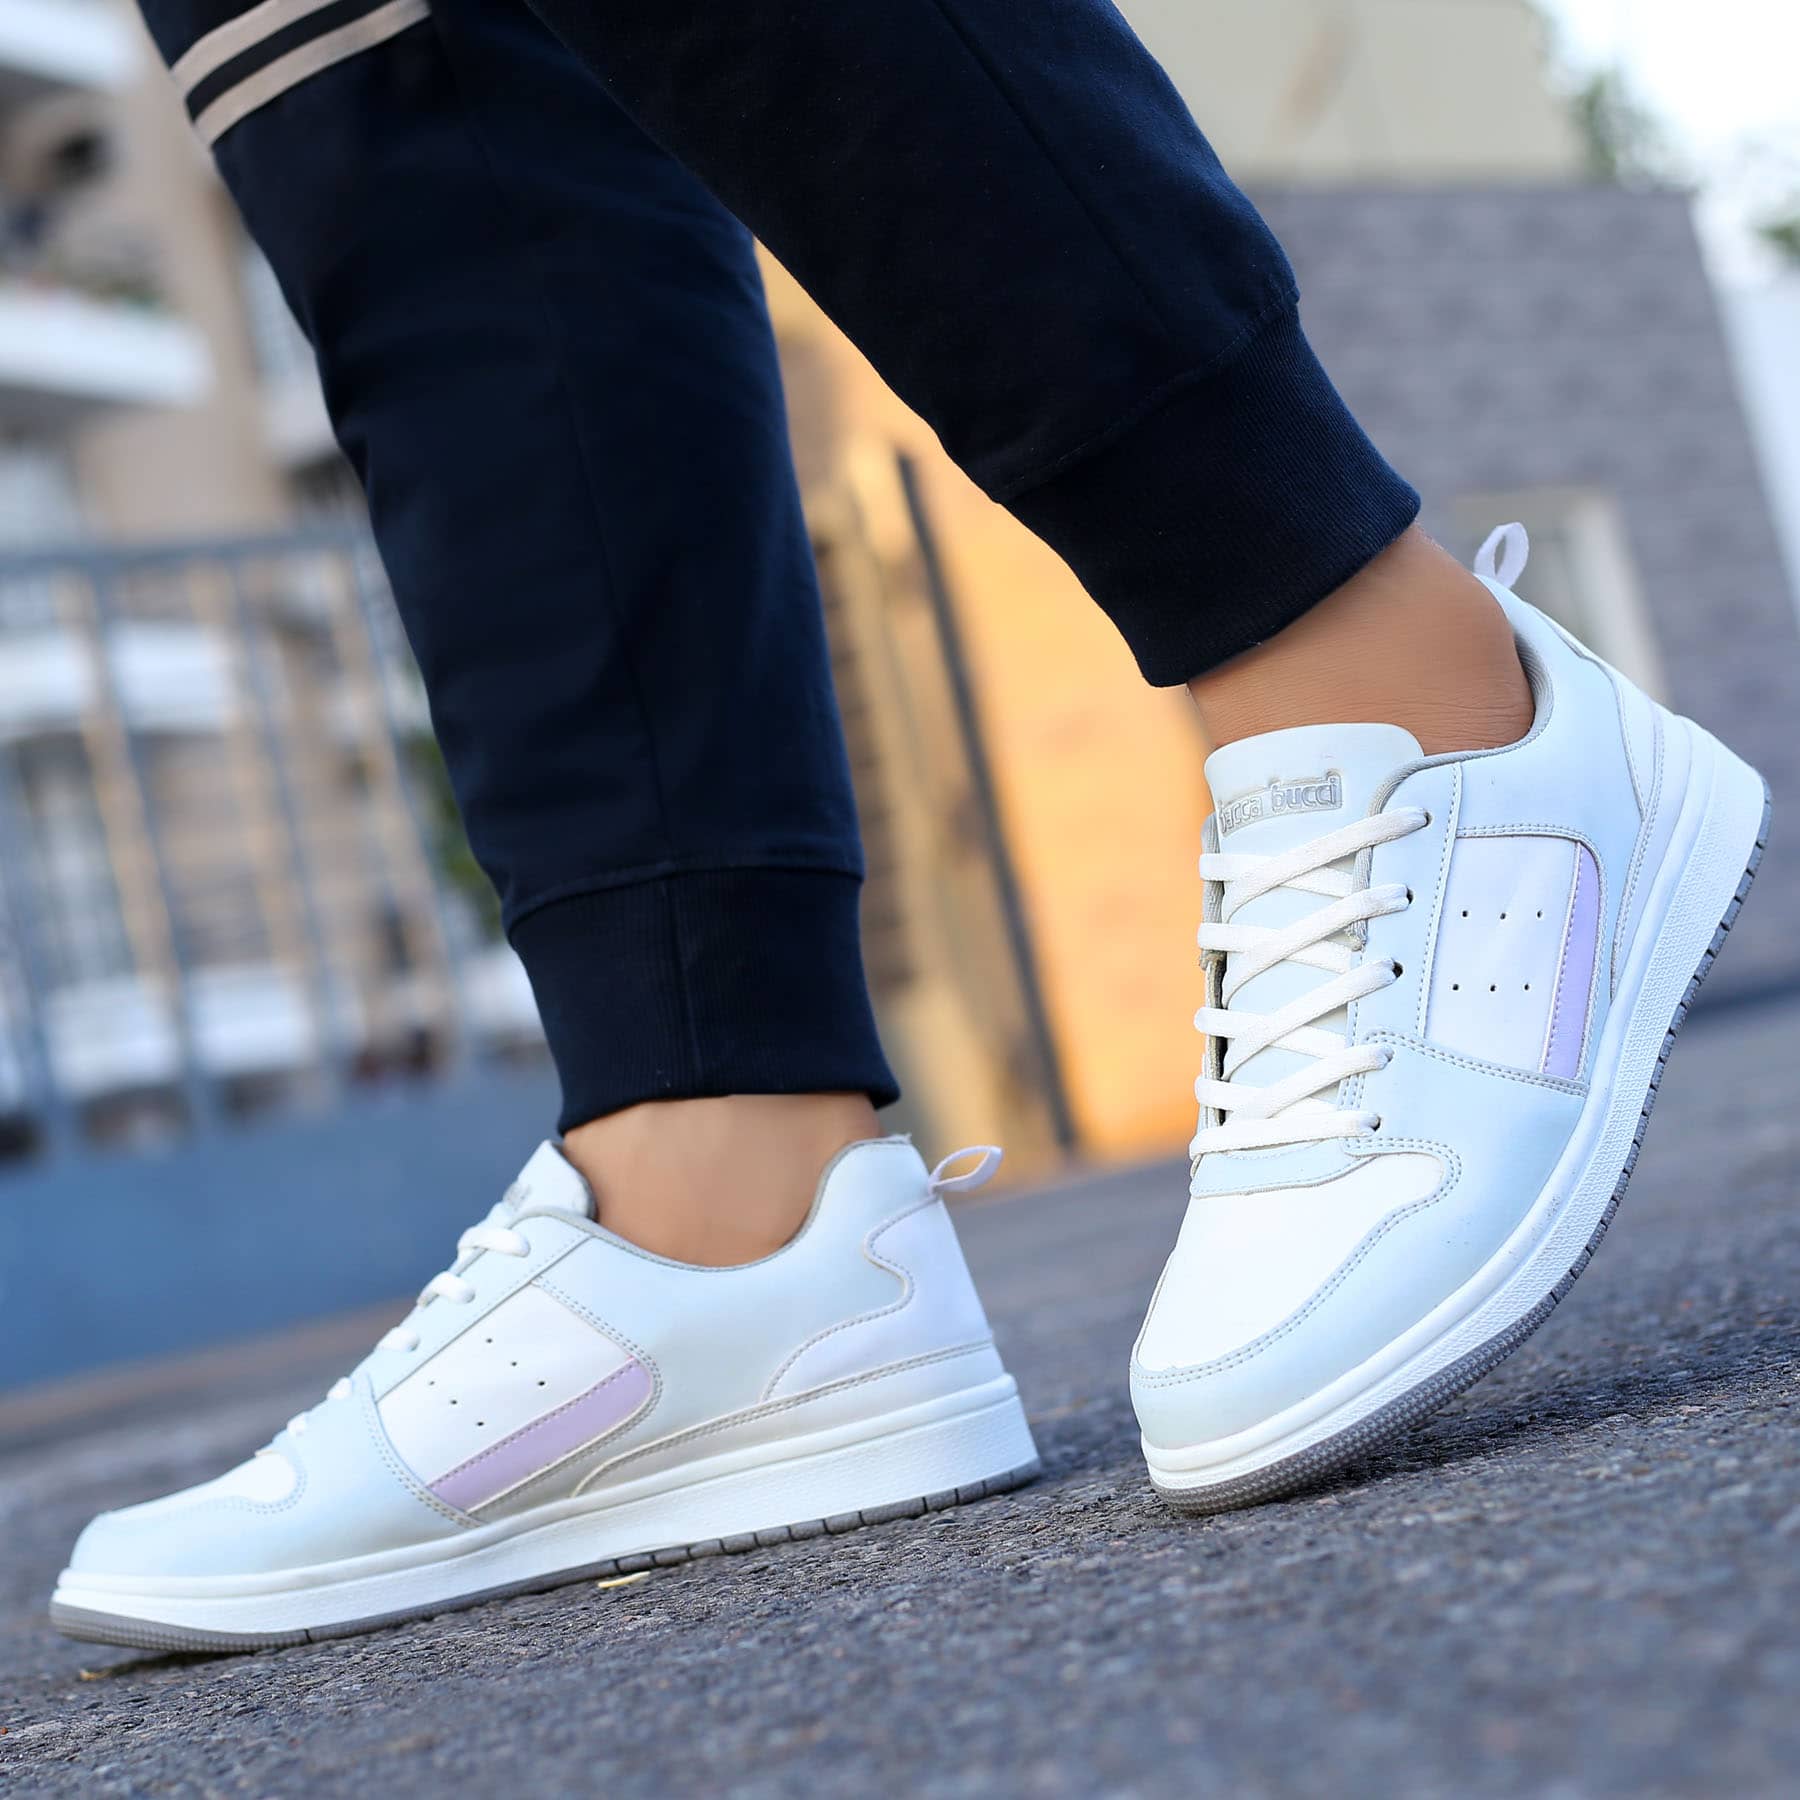 Bacca Bucci Multiverse colour changing Sneakers/Casual Shoe